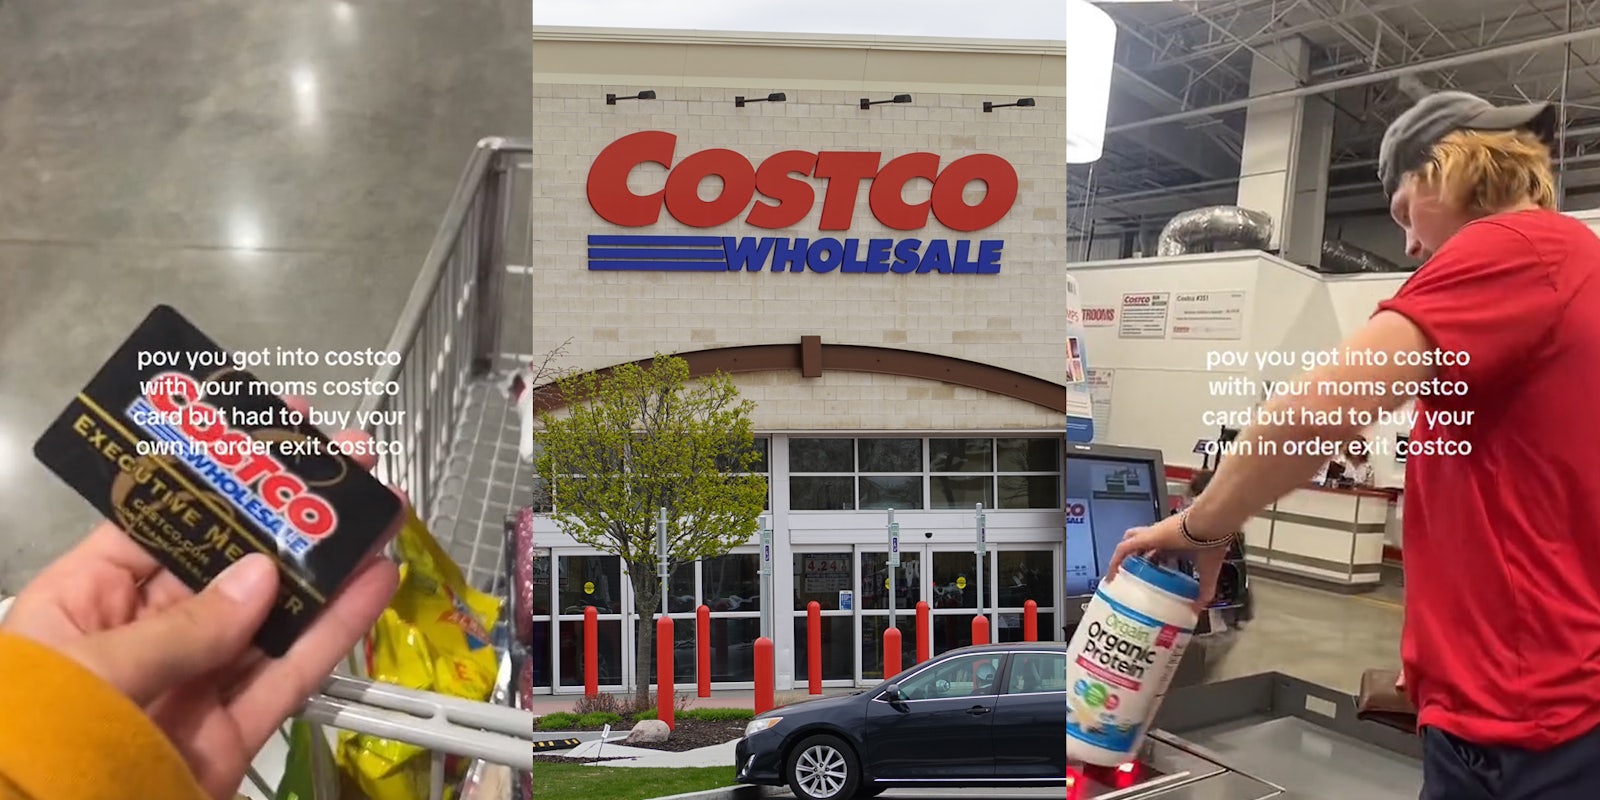 Costco customer holding card with caption 'pov you got into costco with your moms costco card but had to buy your own in order to exit costco' (l) Costco building entrance with sign (c) Costco customer scanning items at checkout with caption 'pov you got into costco with your moms costco card but had to buy your own in order to exit costco' (r)